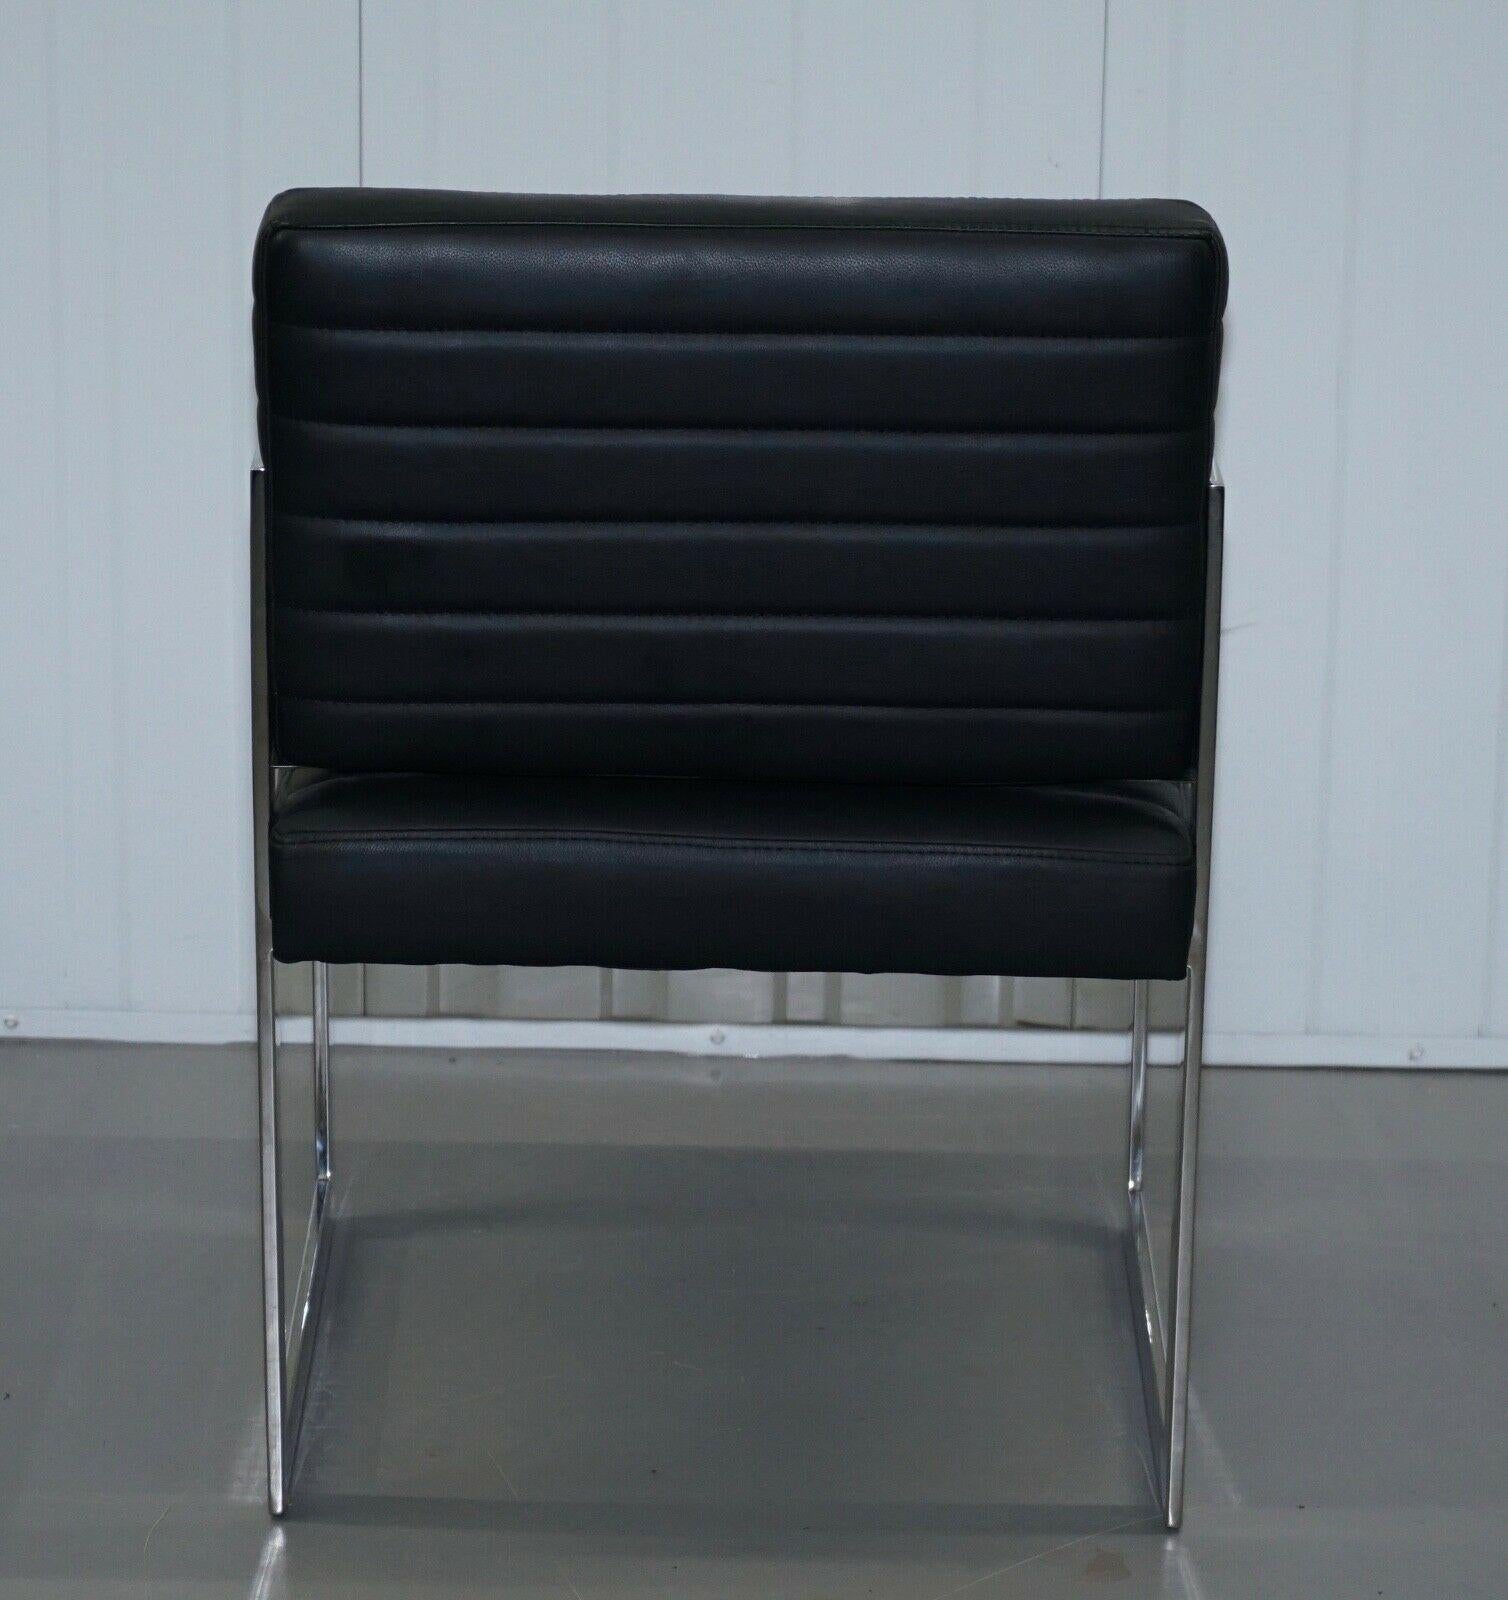 1 of 2 Eichholtz Black Leather & Chrome Office Desk Chairs 2